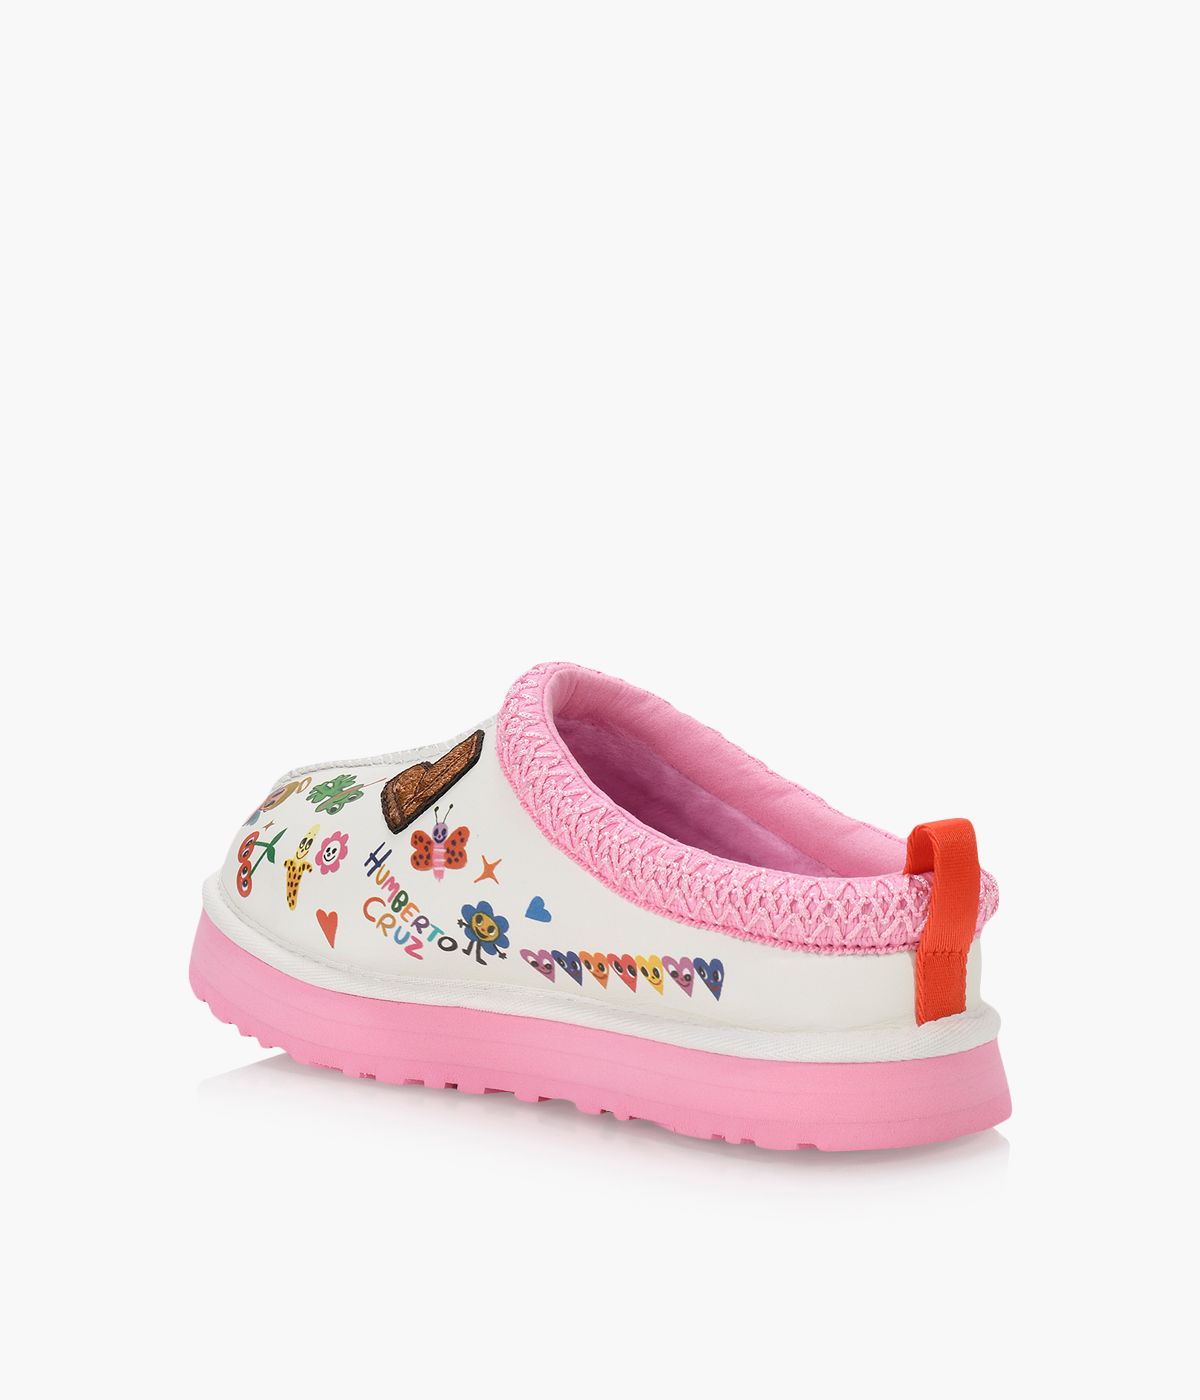 UGG TAZZ POP SKETCH - Multicolour | Browns Shoes